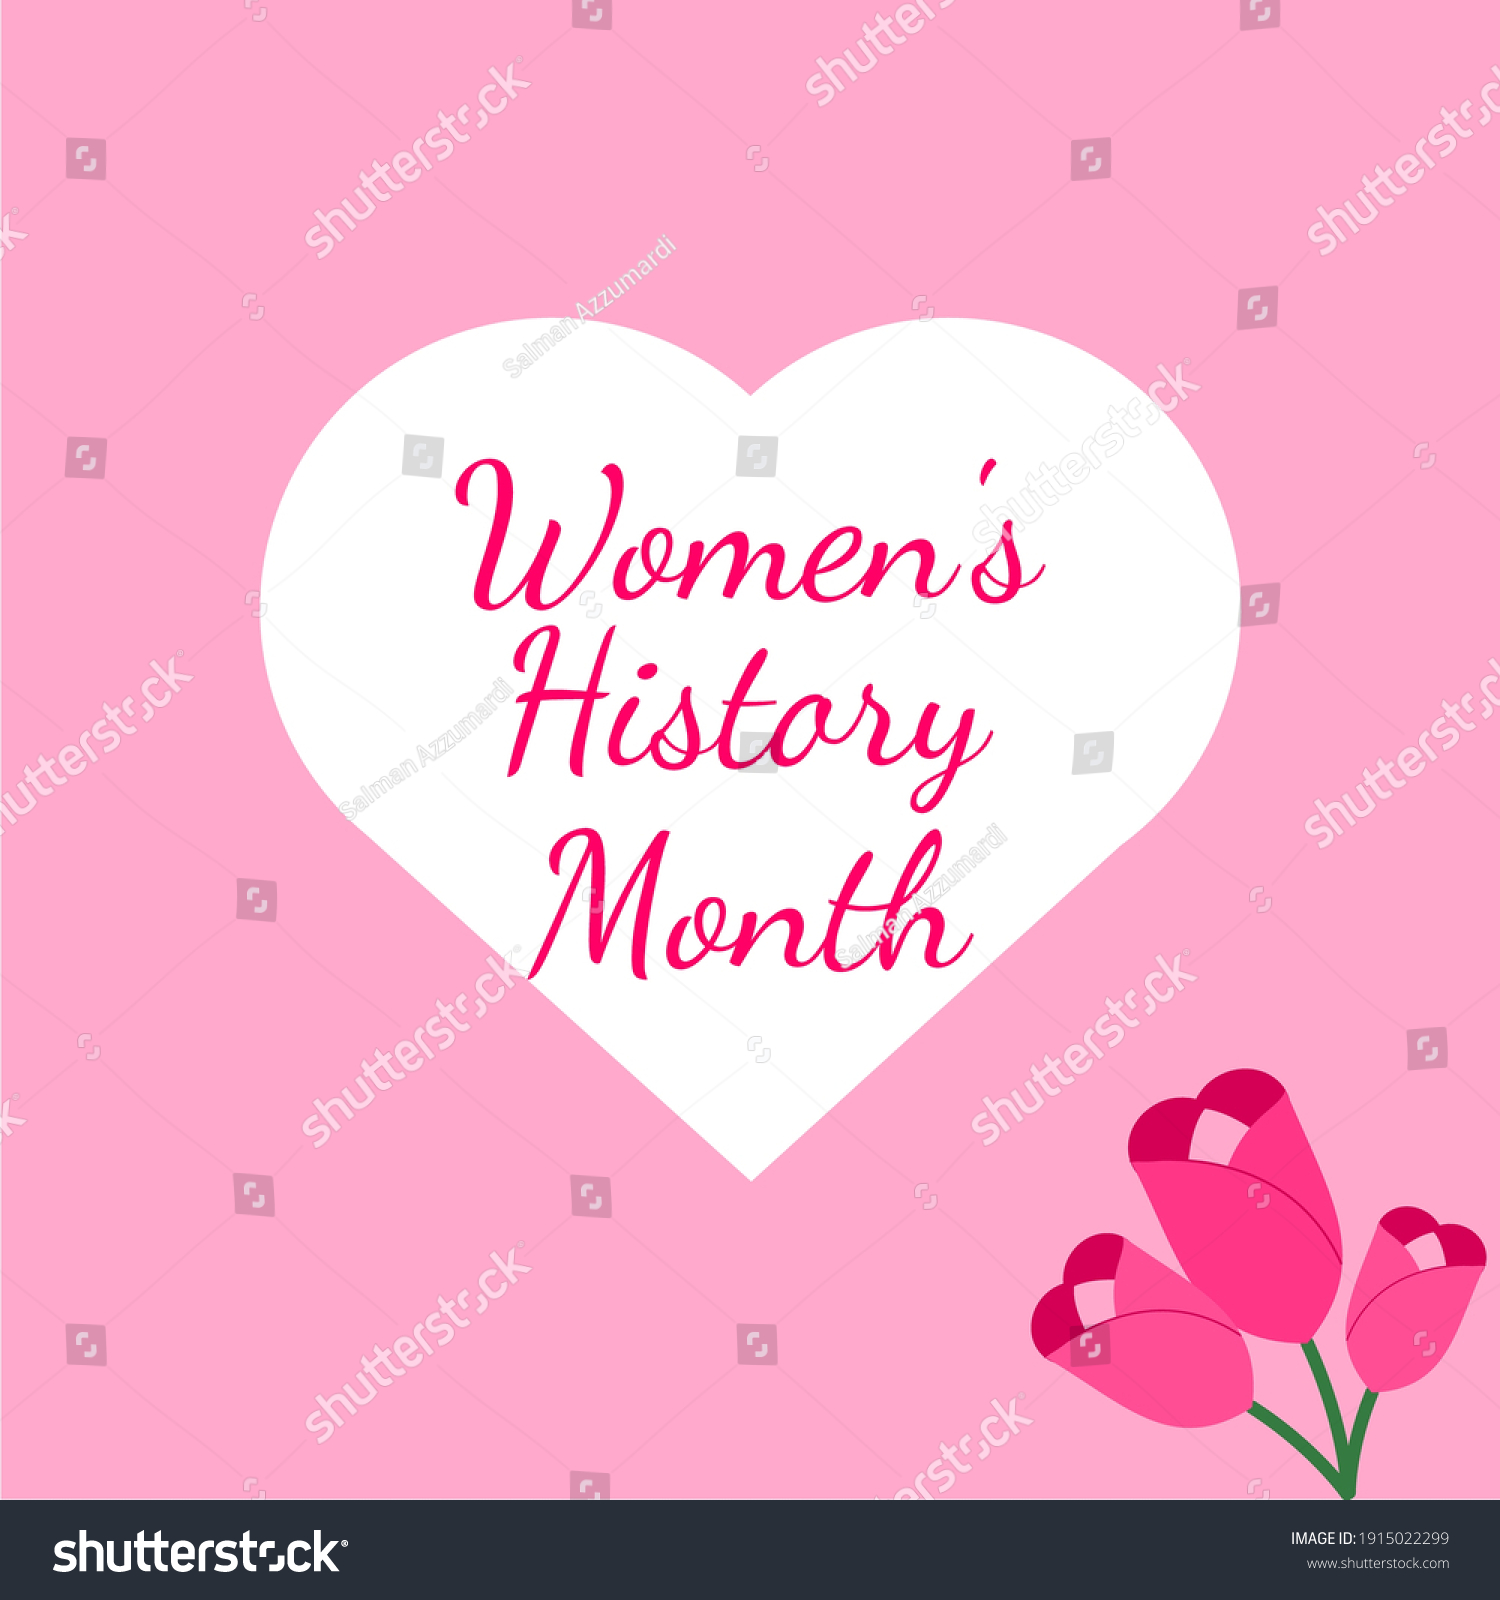 women-s-history-month-women-s-day-royalty-free-stock-vector